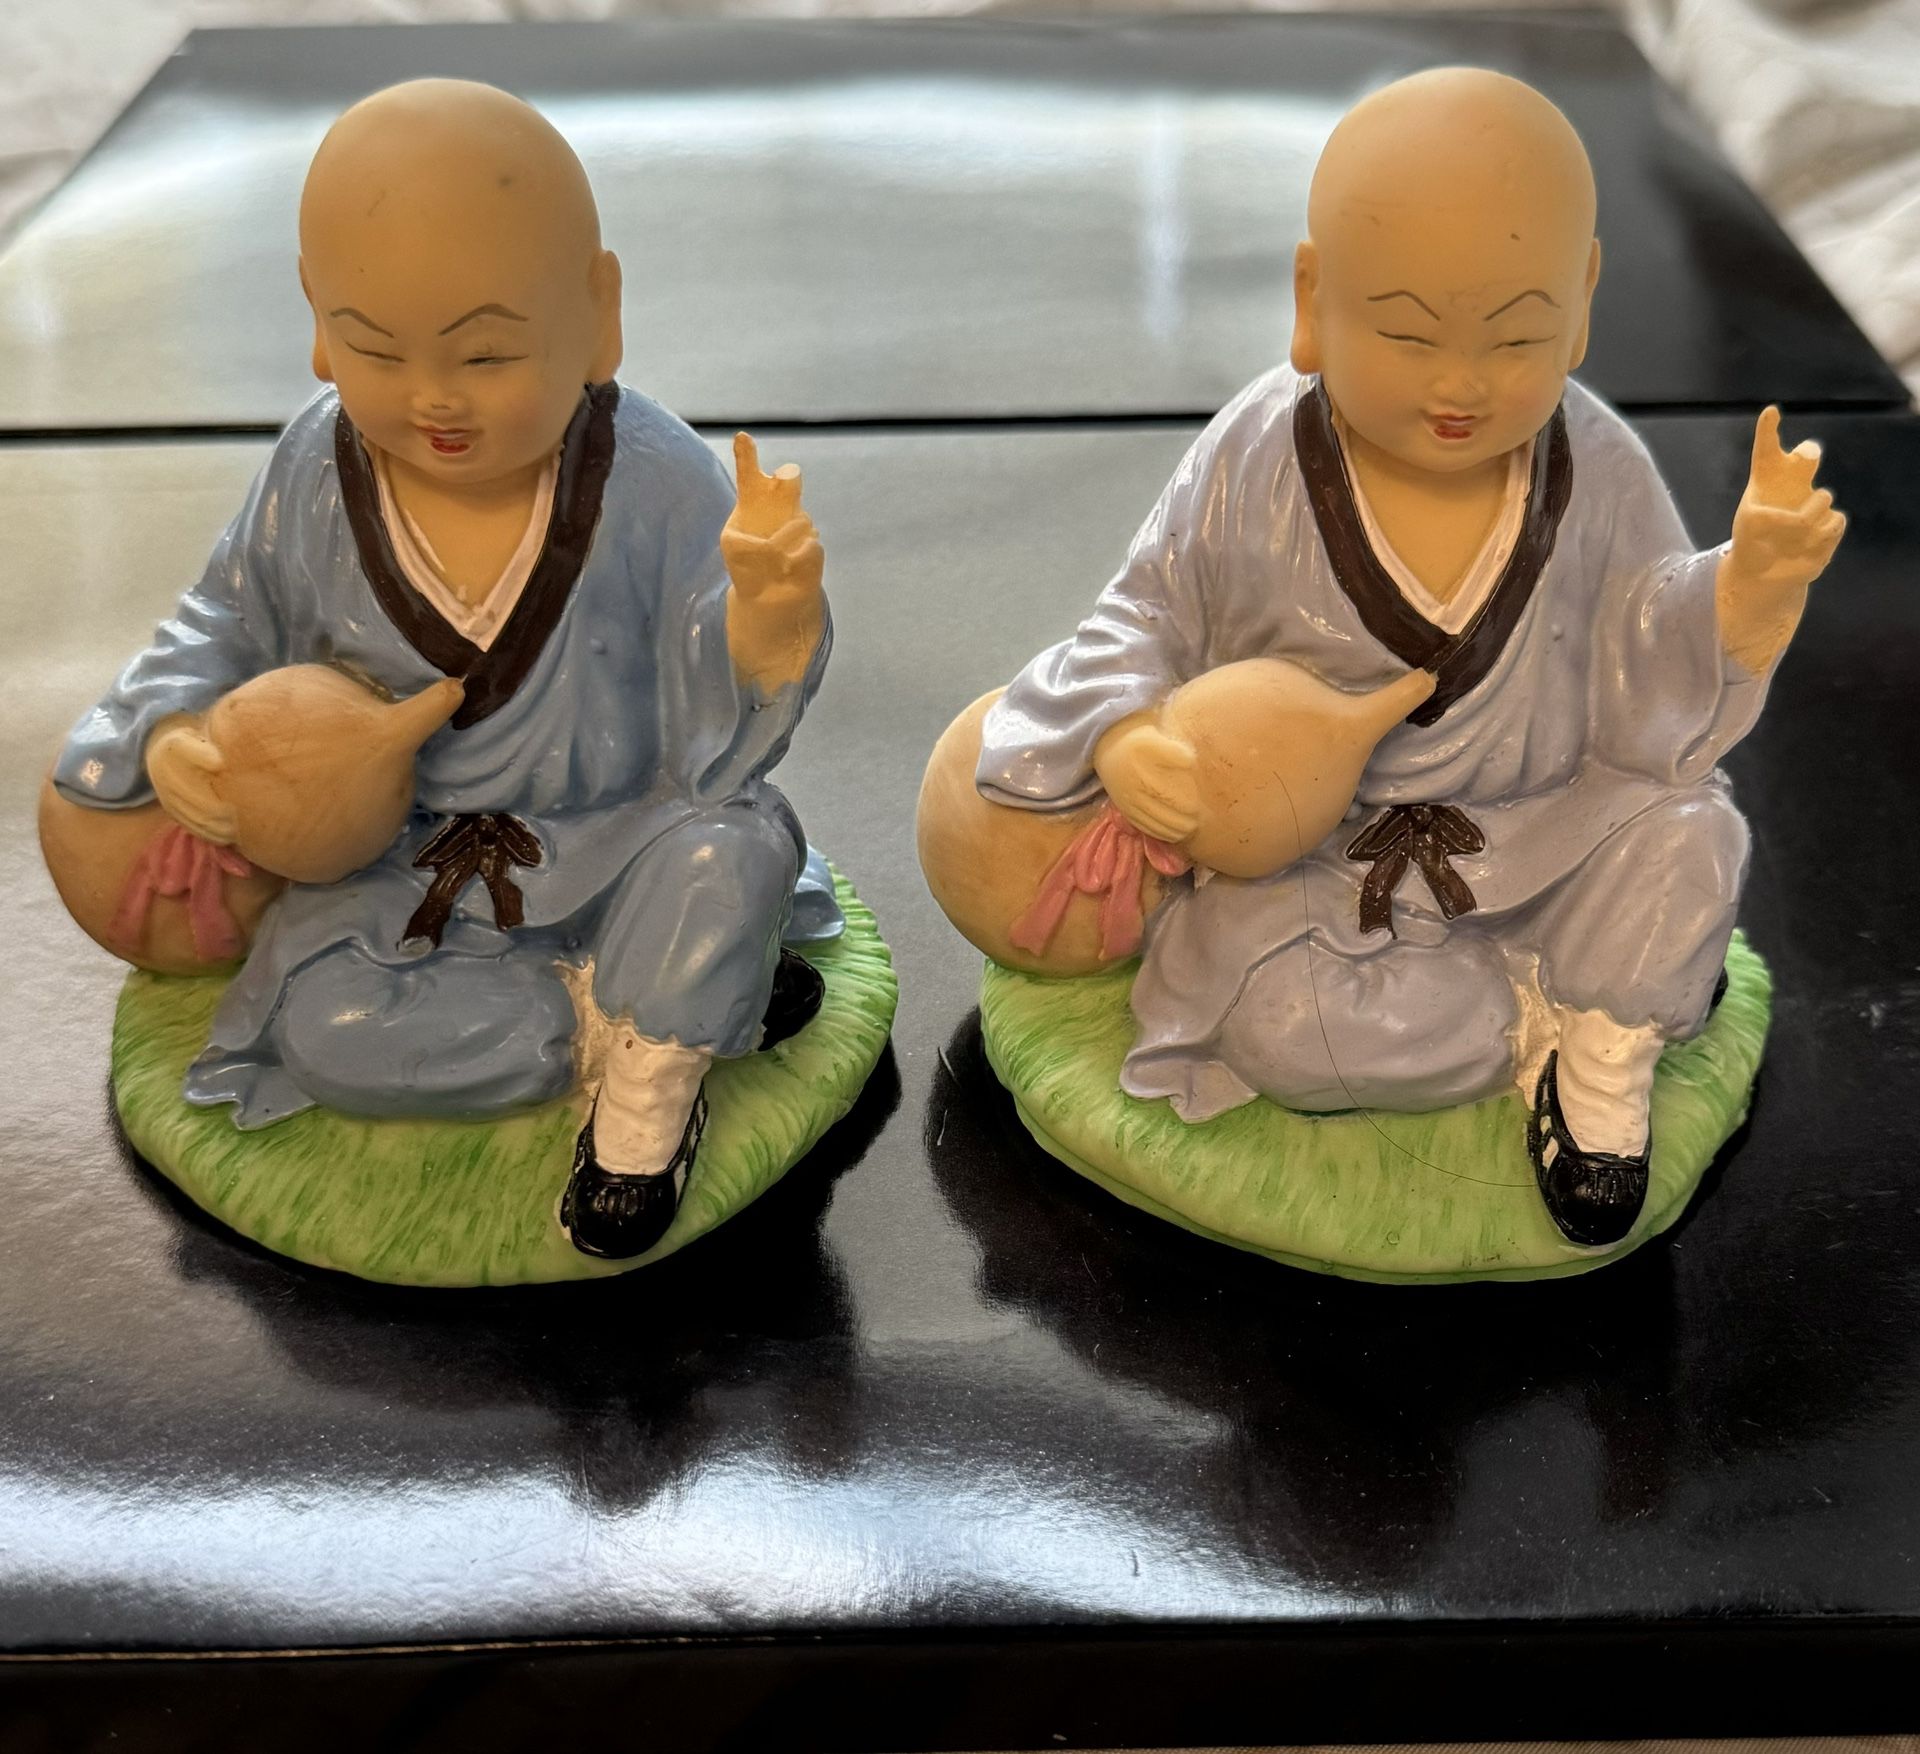 Brand New Buddha Monk Baby Statue Figurine Sitting 4” - 5” inches $6 Each !!!ACCEPTING OFFERS!!!